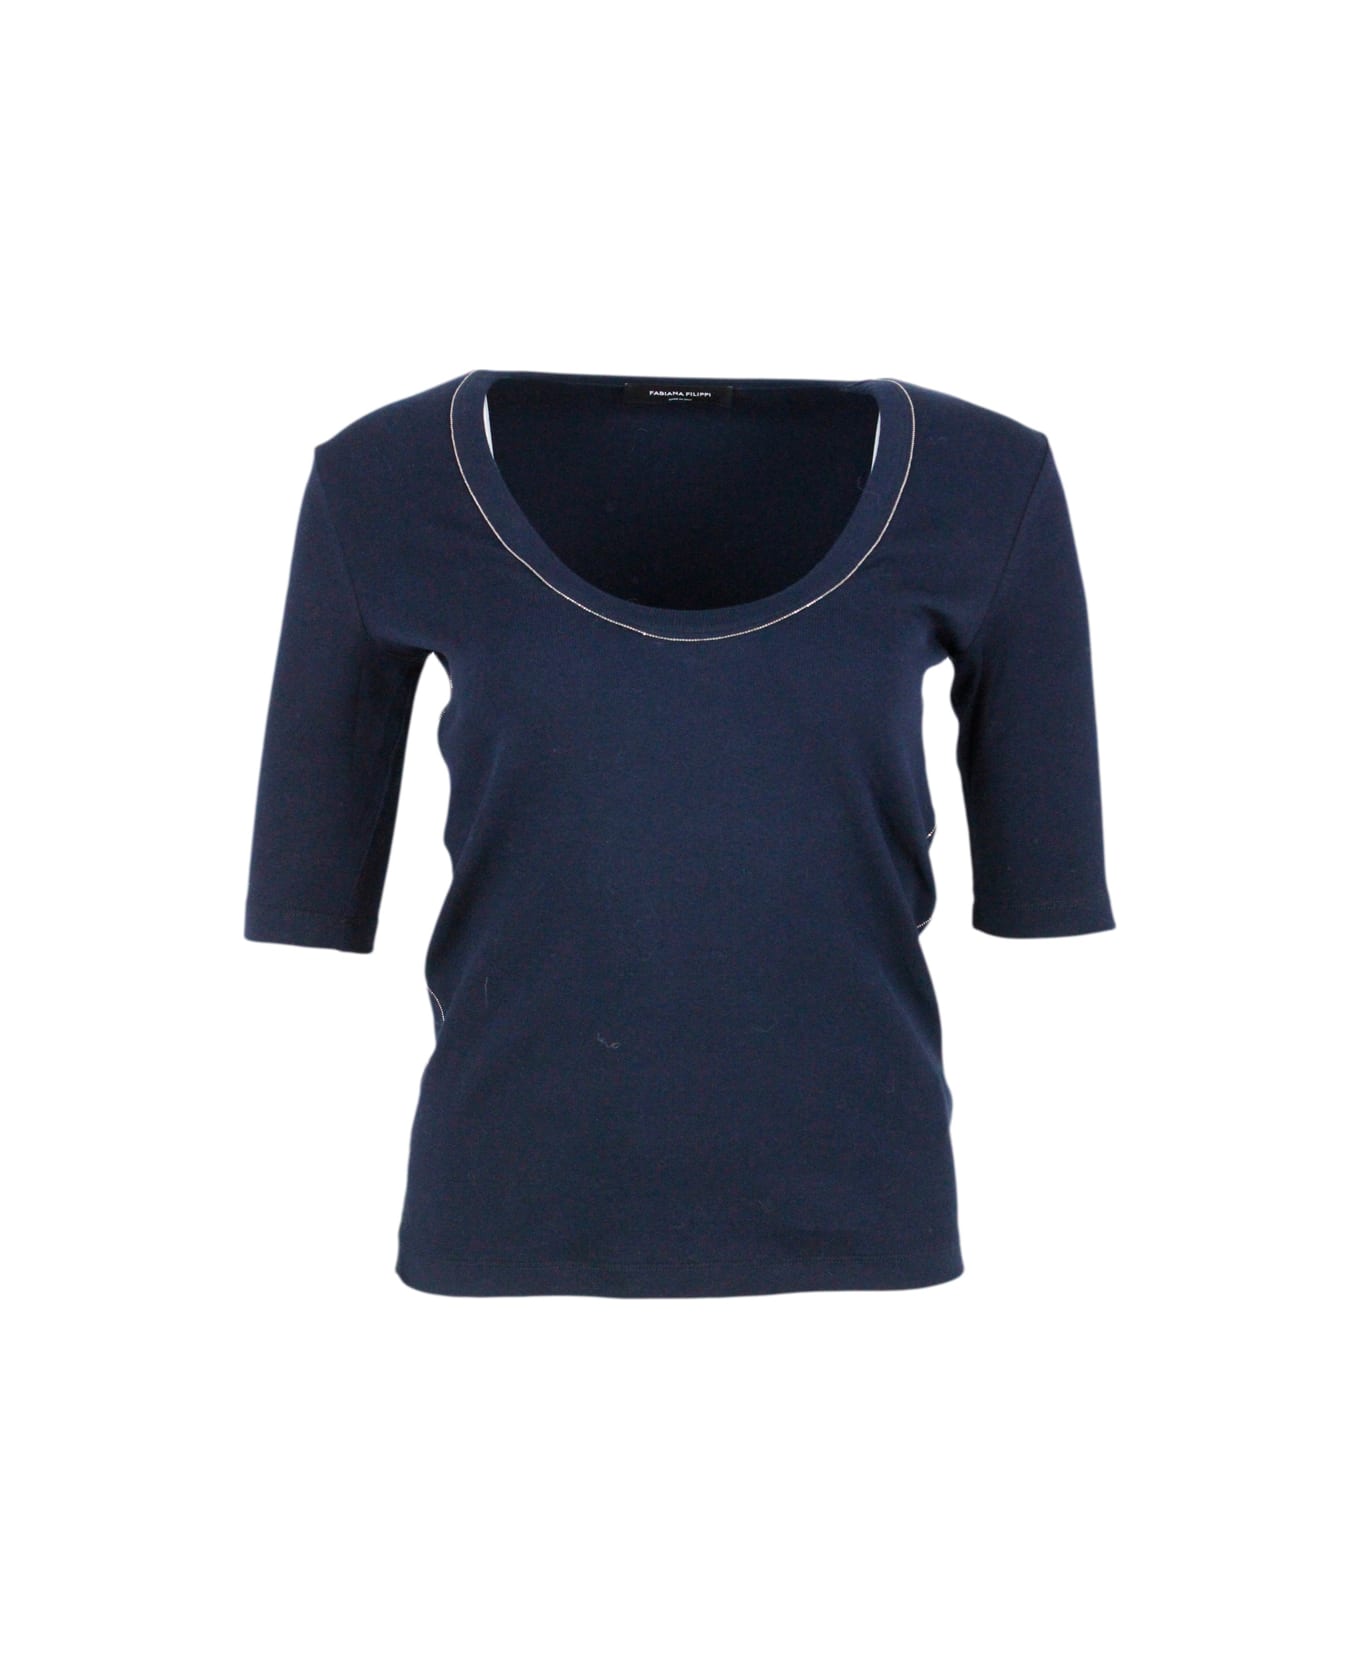 Fabiana Filippi Ribbed Cotton T-shirt With U-neck, Elbow-length Sleeves Embellished With Rows Of Monili On The Neck And Sides - Blu